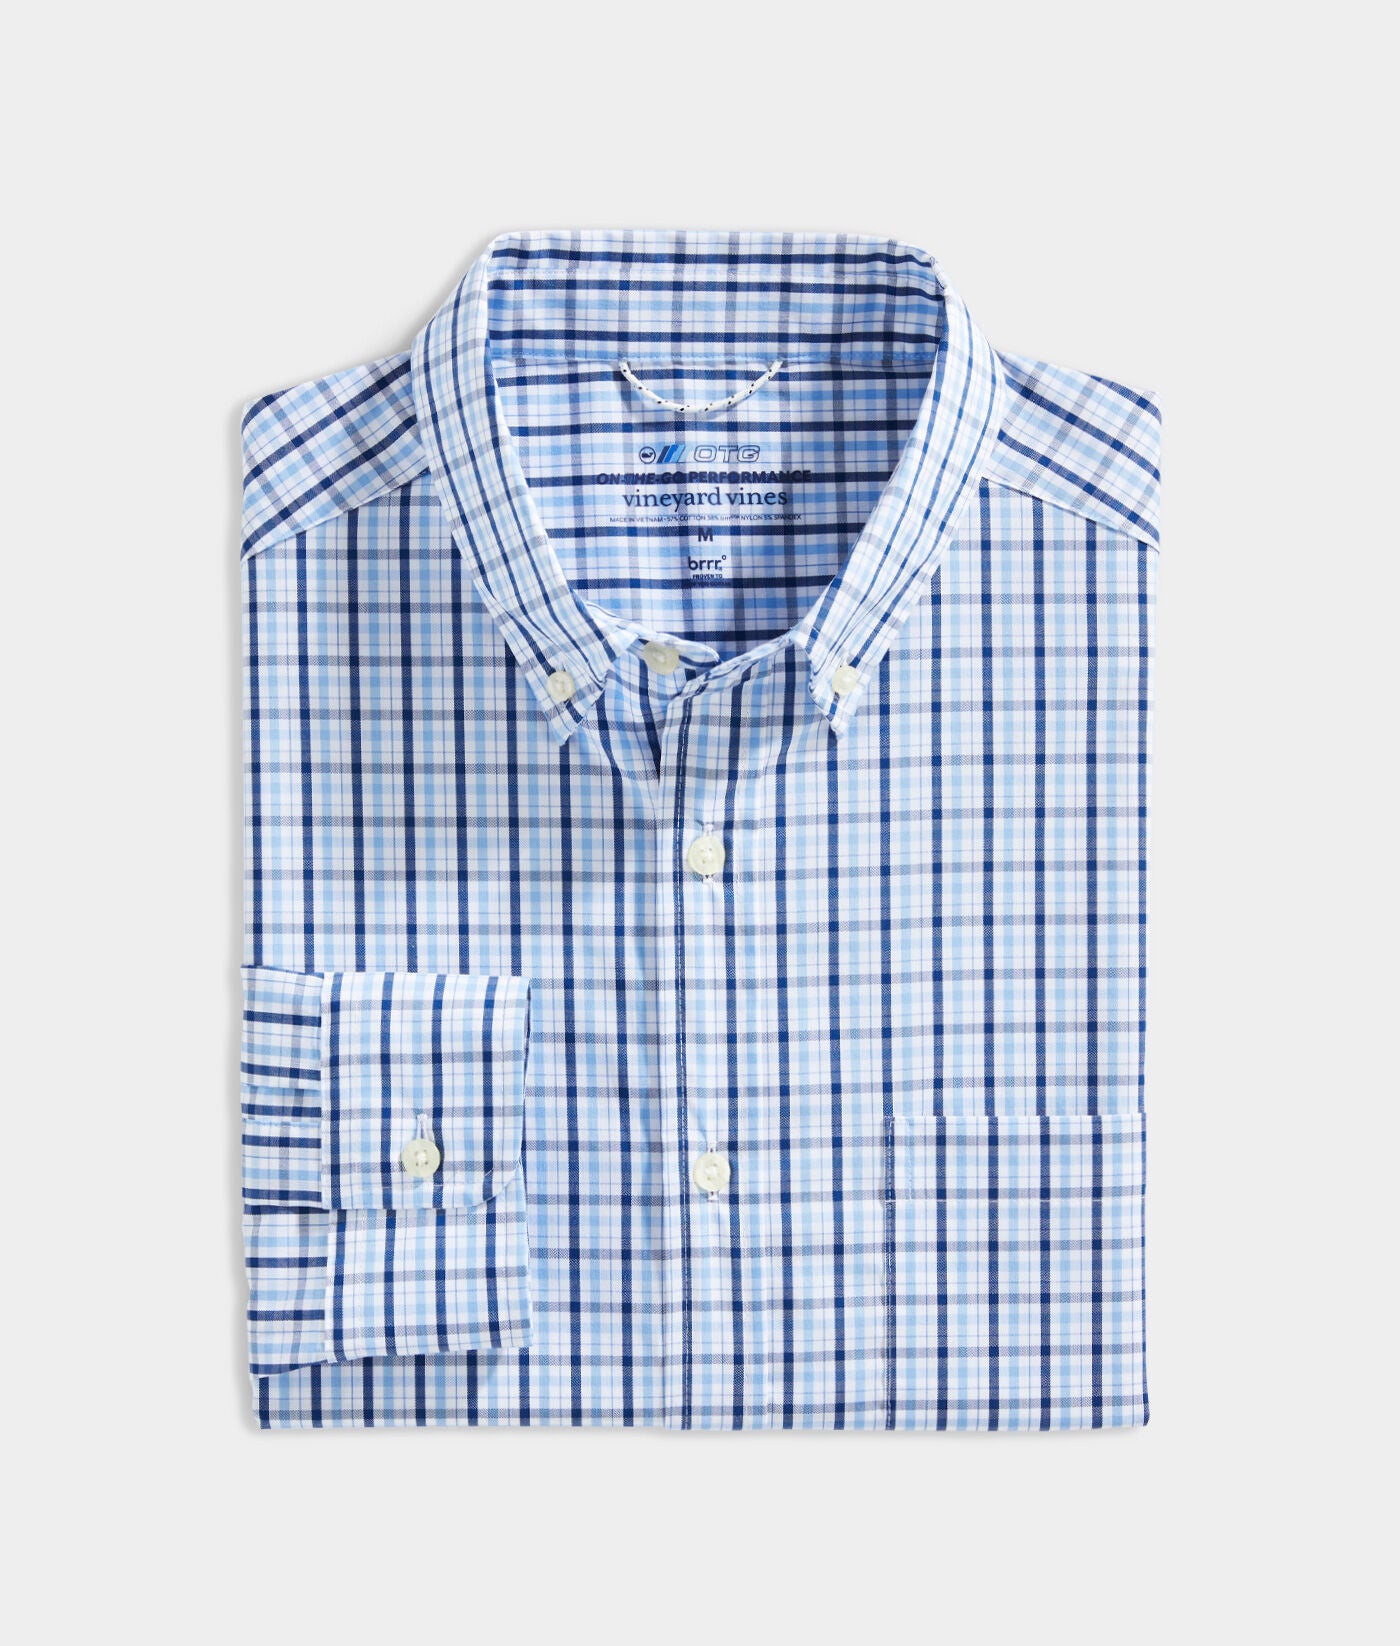 Men's Classic Fit Check On-The-Go Long Sleeve Button Down Shirt - Vineyard Vines